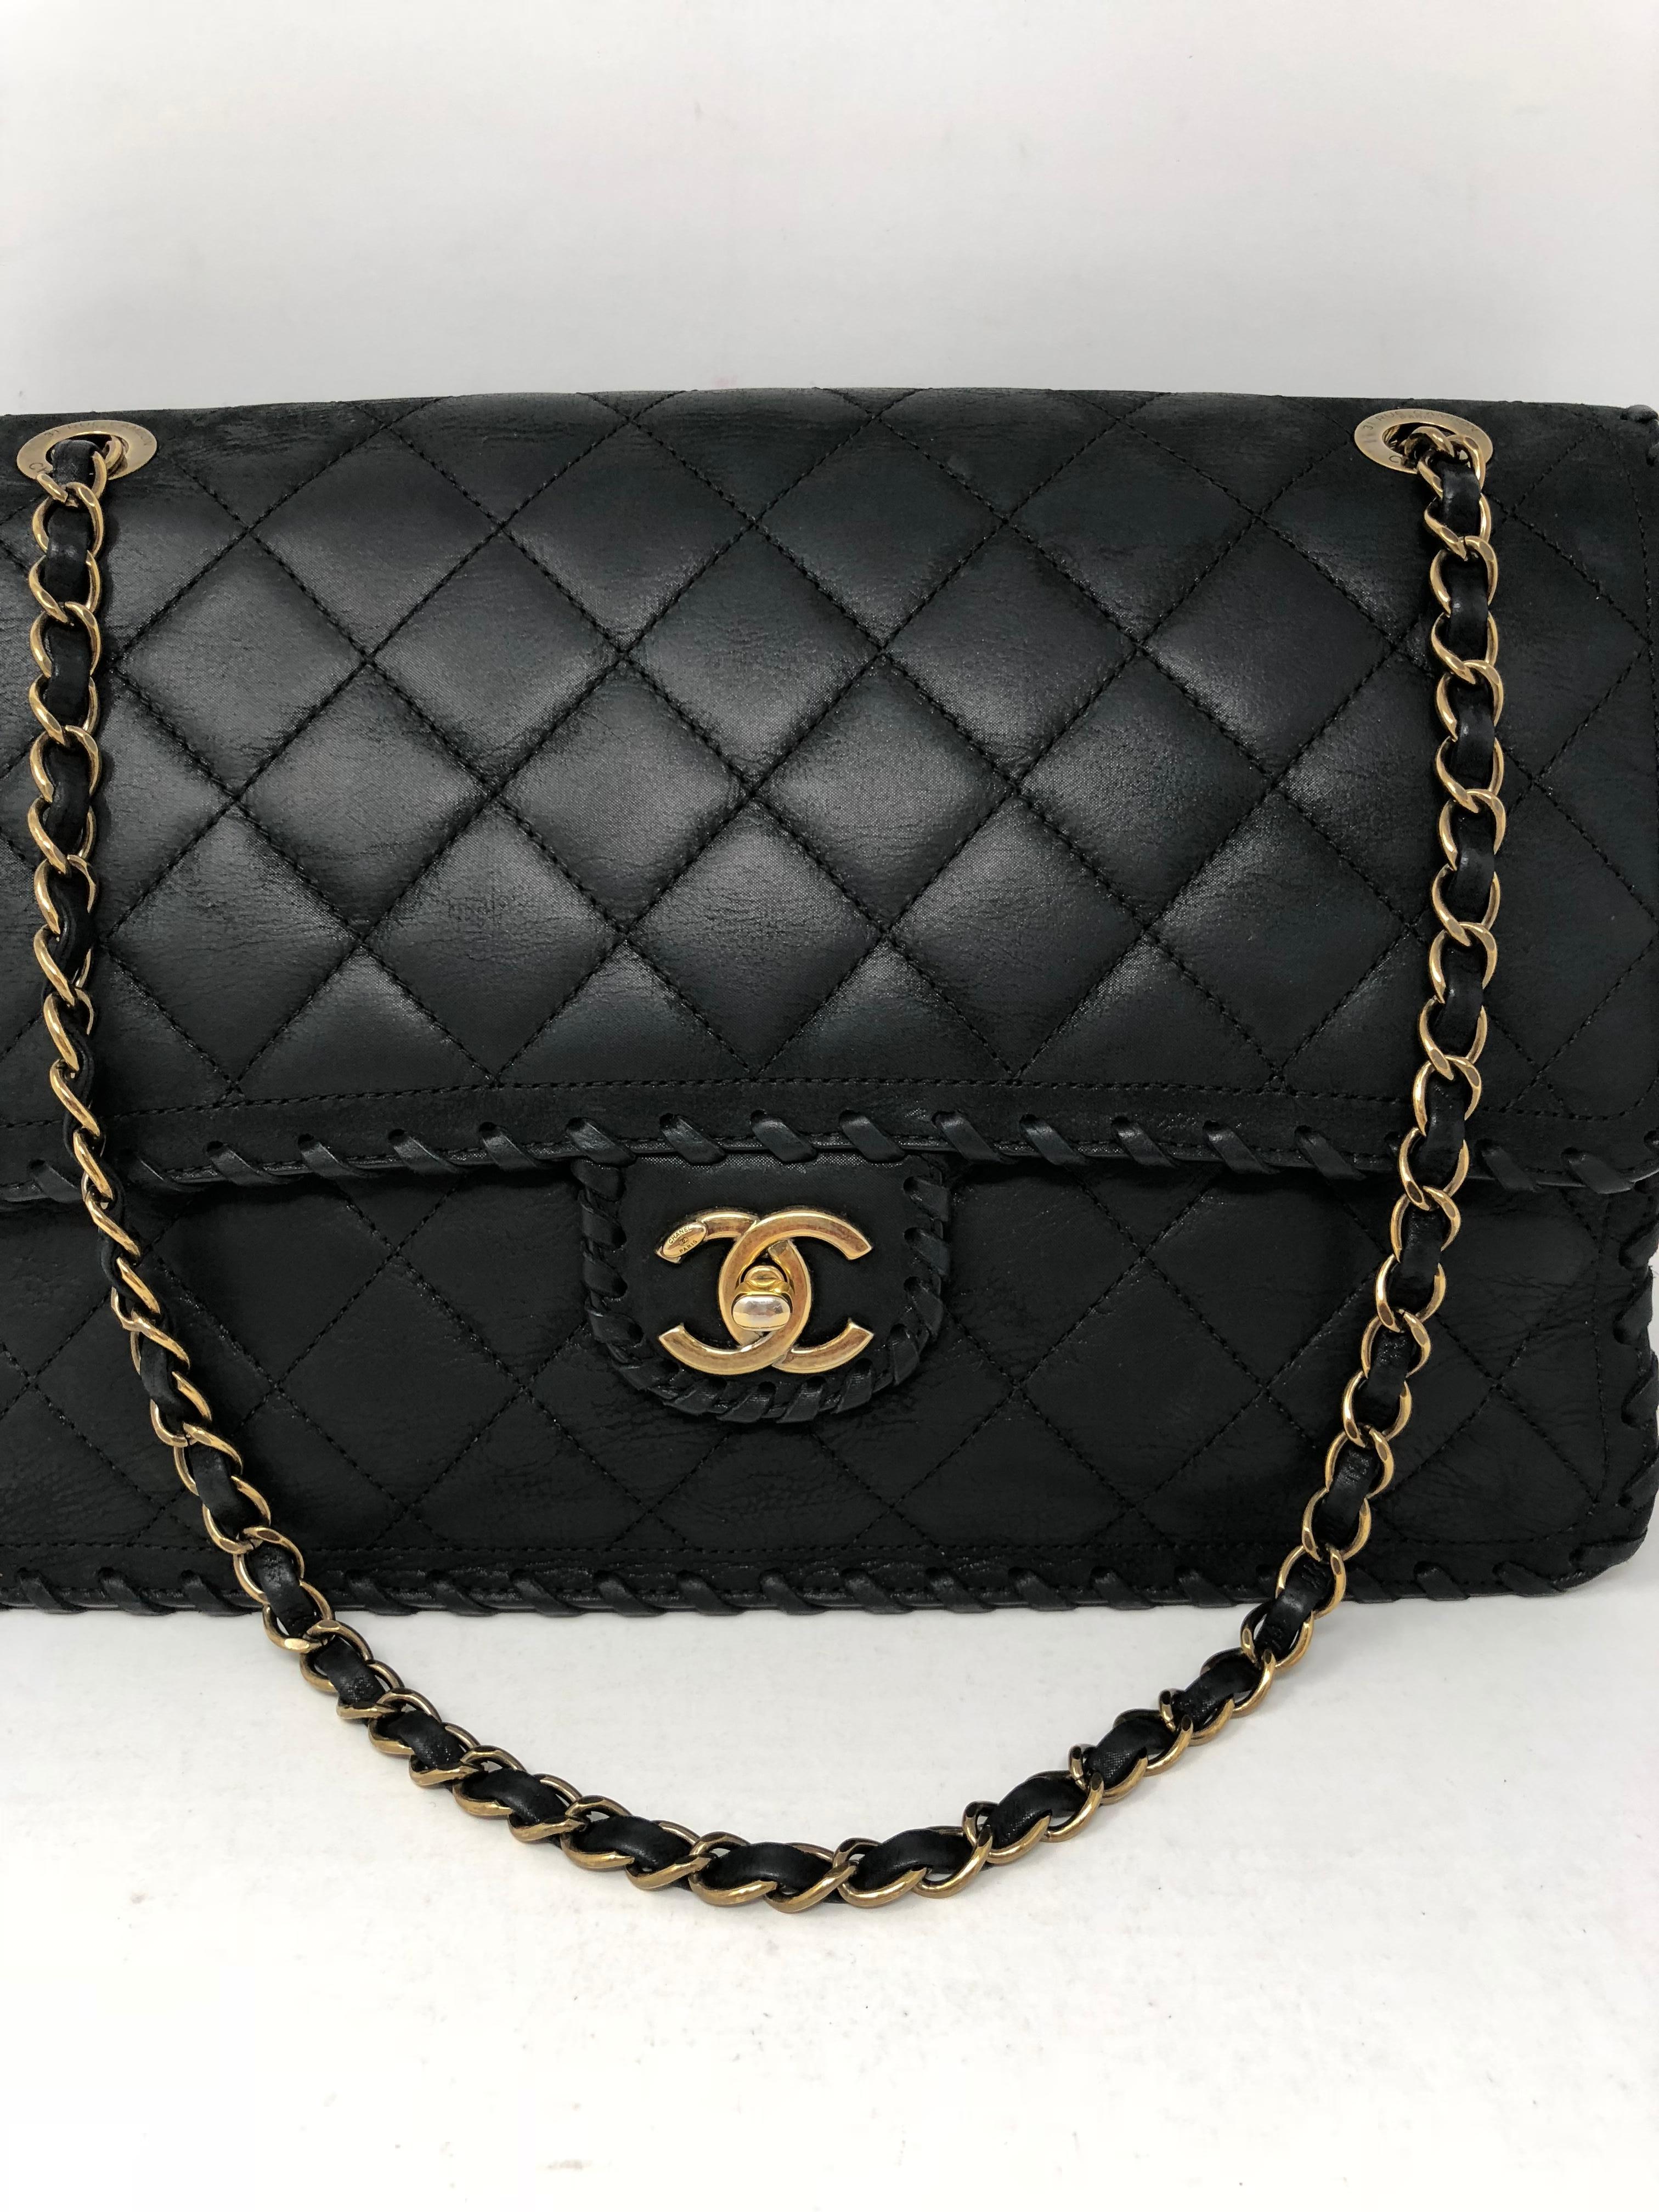 Chanel Black Happy Stitch Limited Edition Jumbo Bag in Calf leather. Series 21 with antique gold hardware. Good condition with authenticity card. Guaranteed authentic.